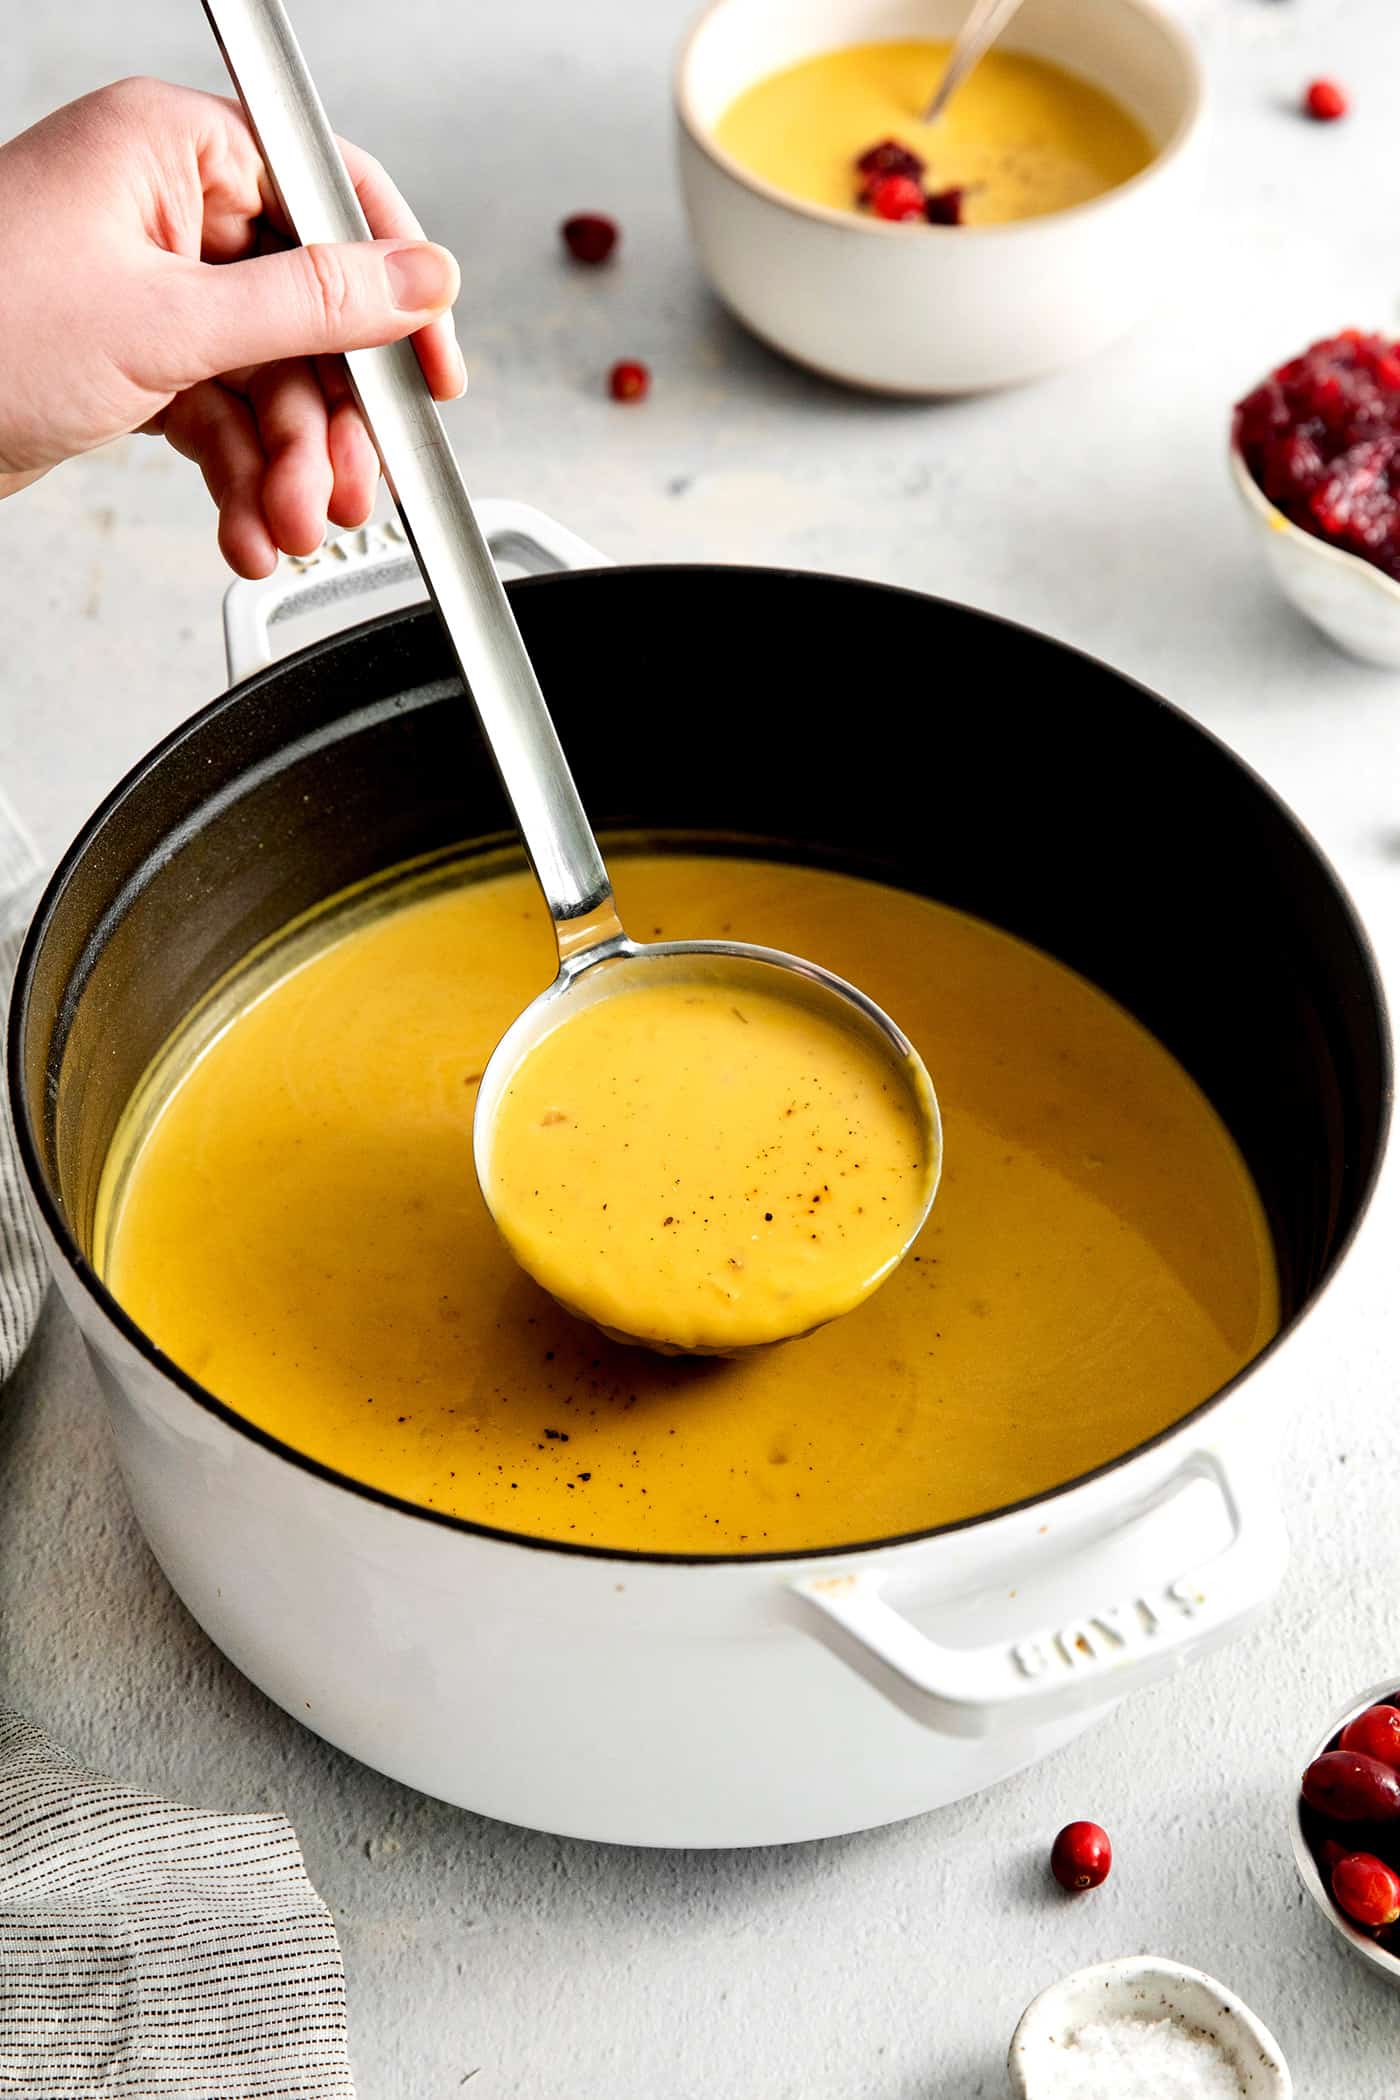 Squash soup being served in a metal ladle